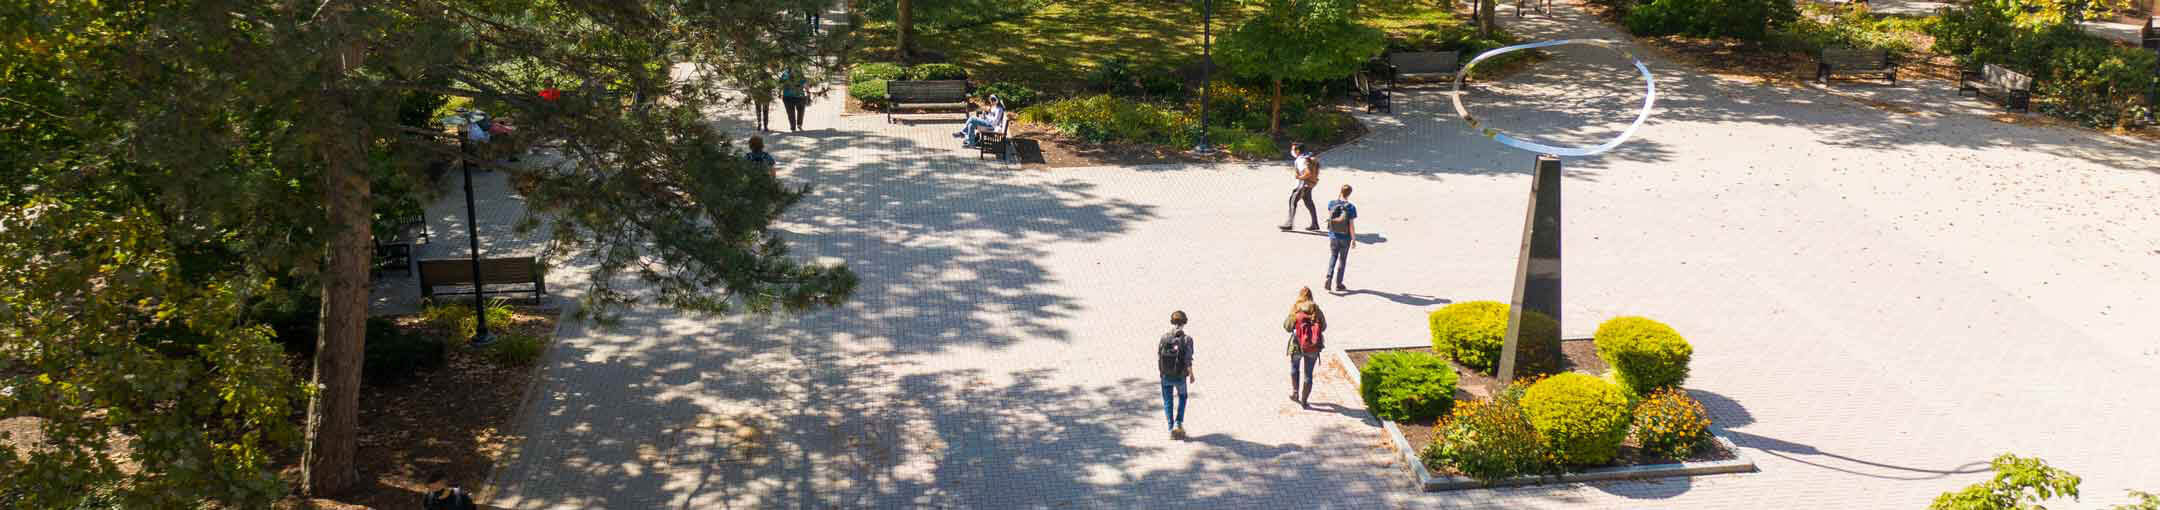 Aerial view of the R I T campus, showing students walking through Infinity Quad.